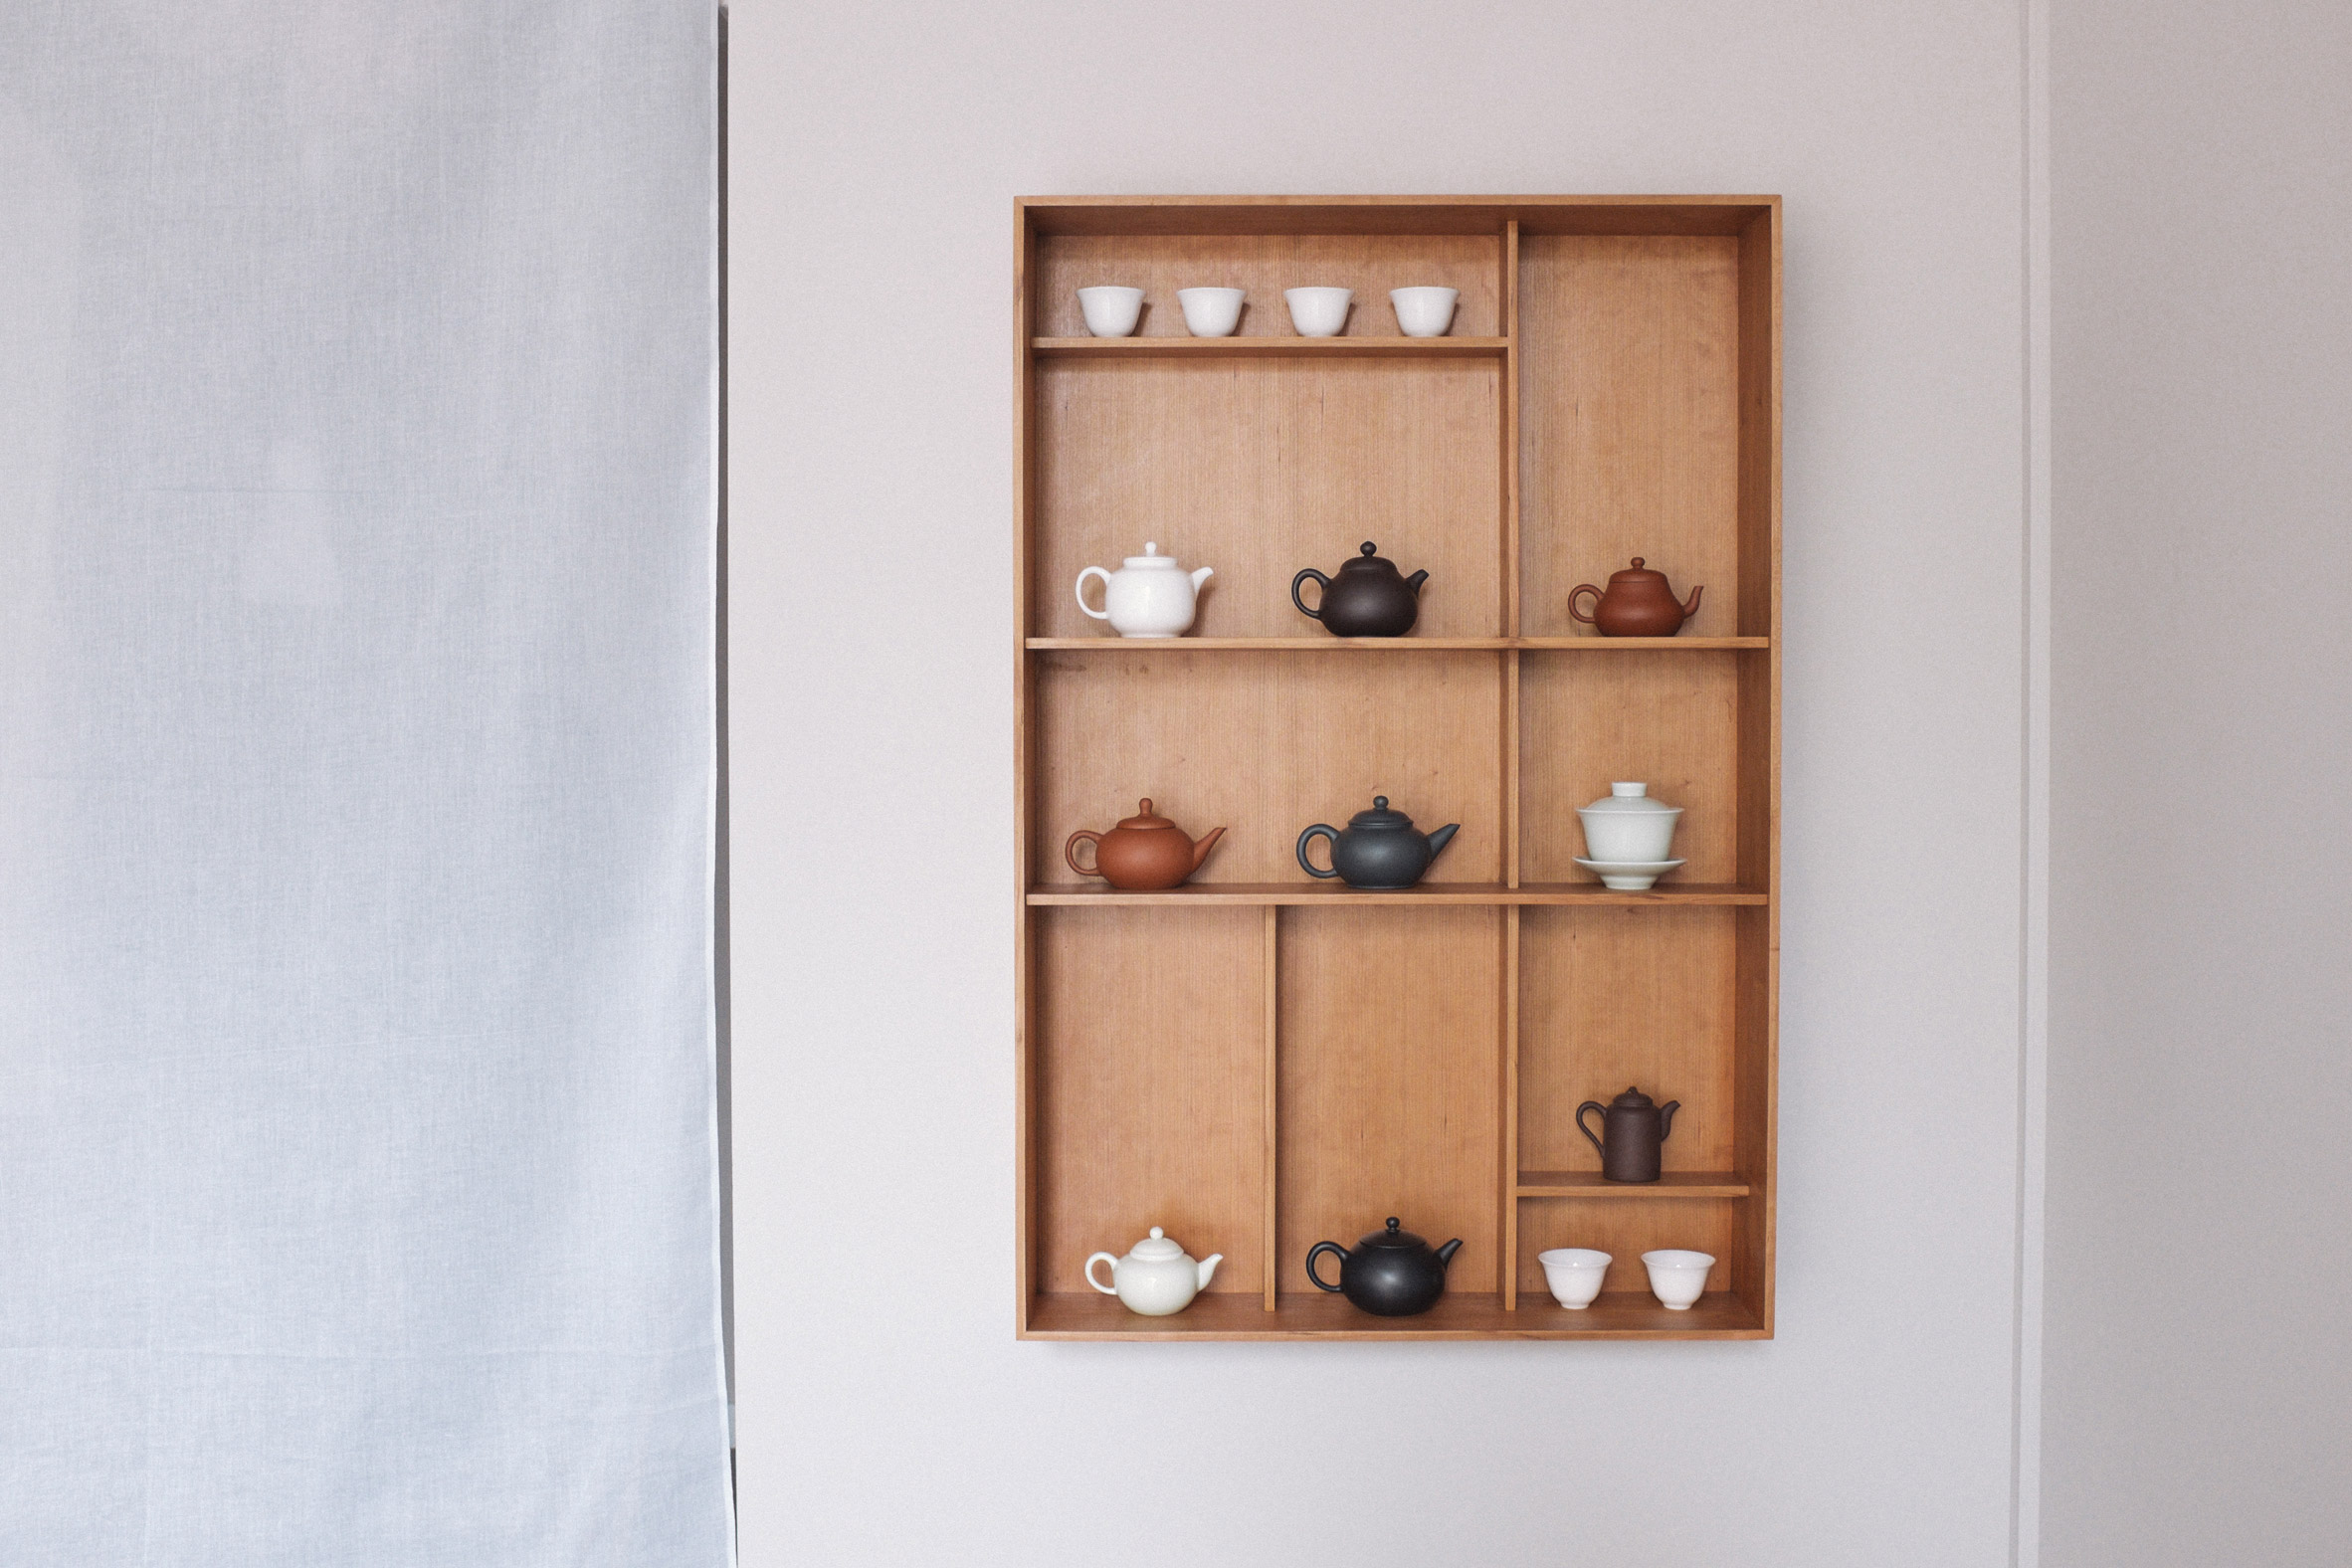 Native - Co designs clay Wu teapots to suit specific brews-3